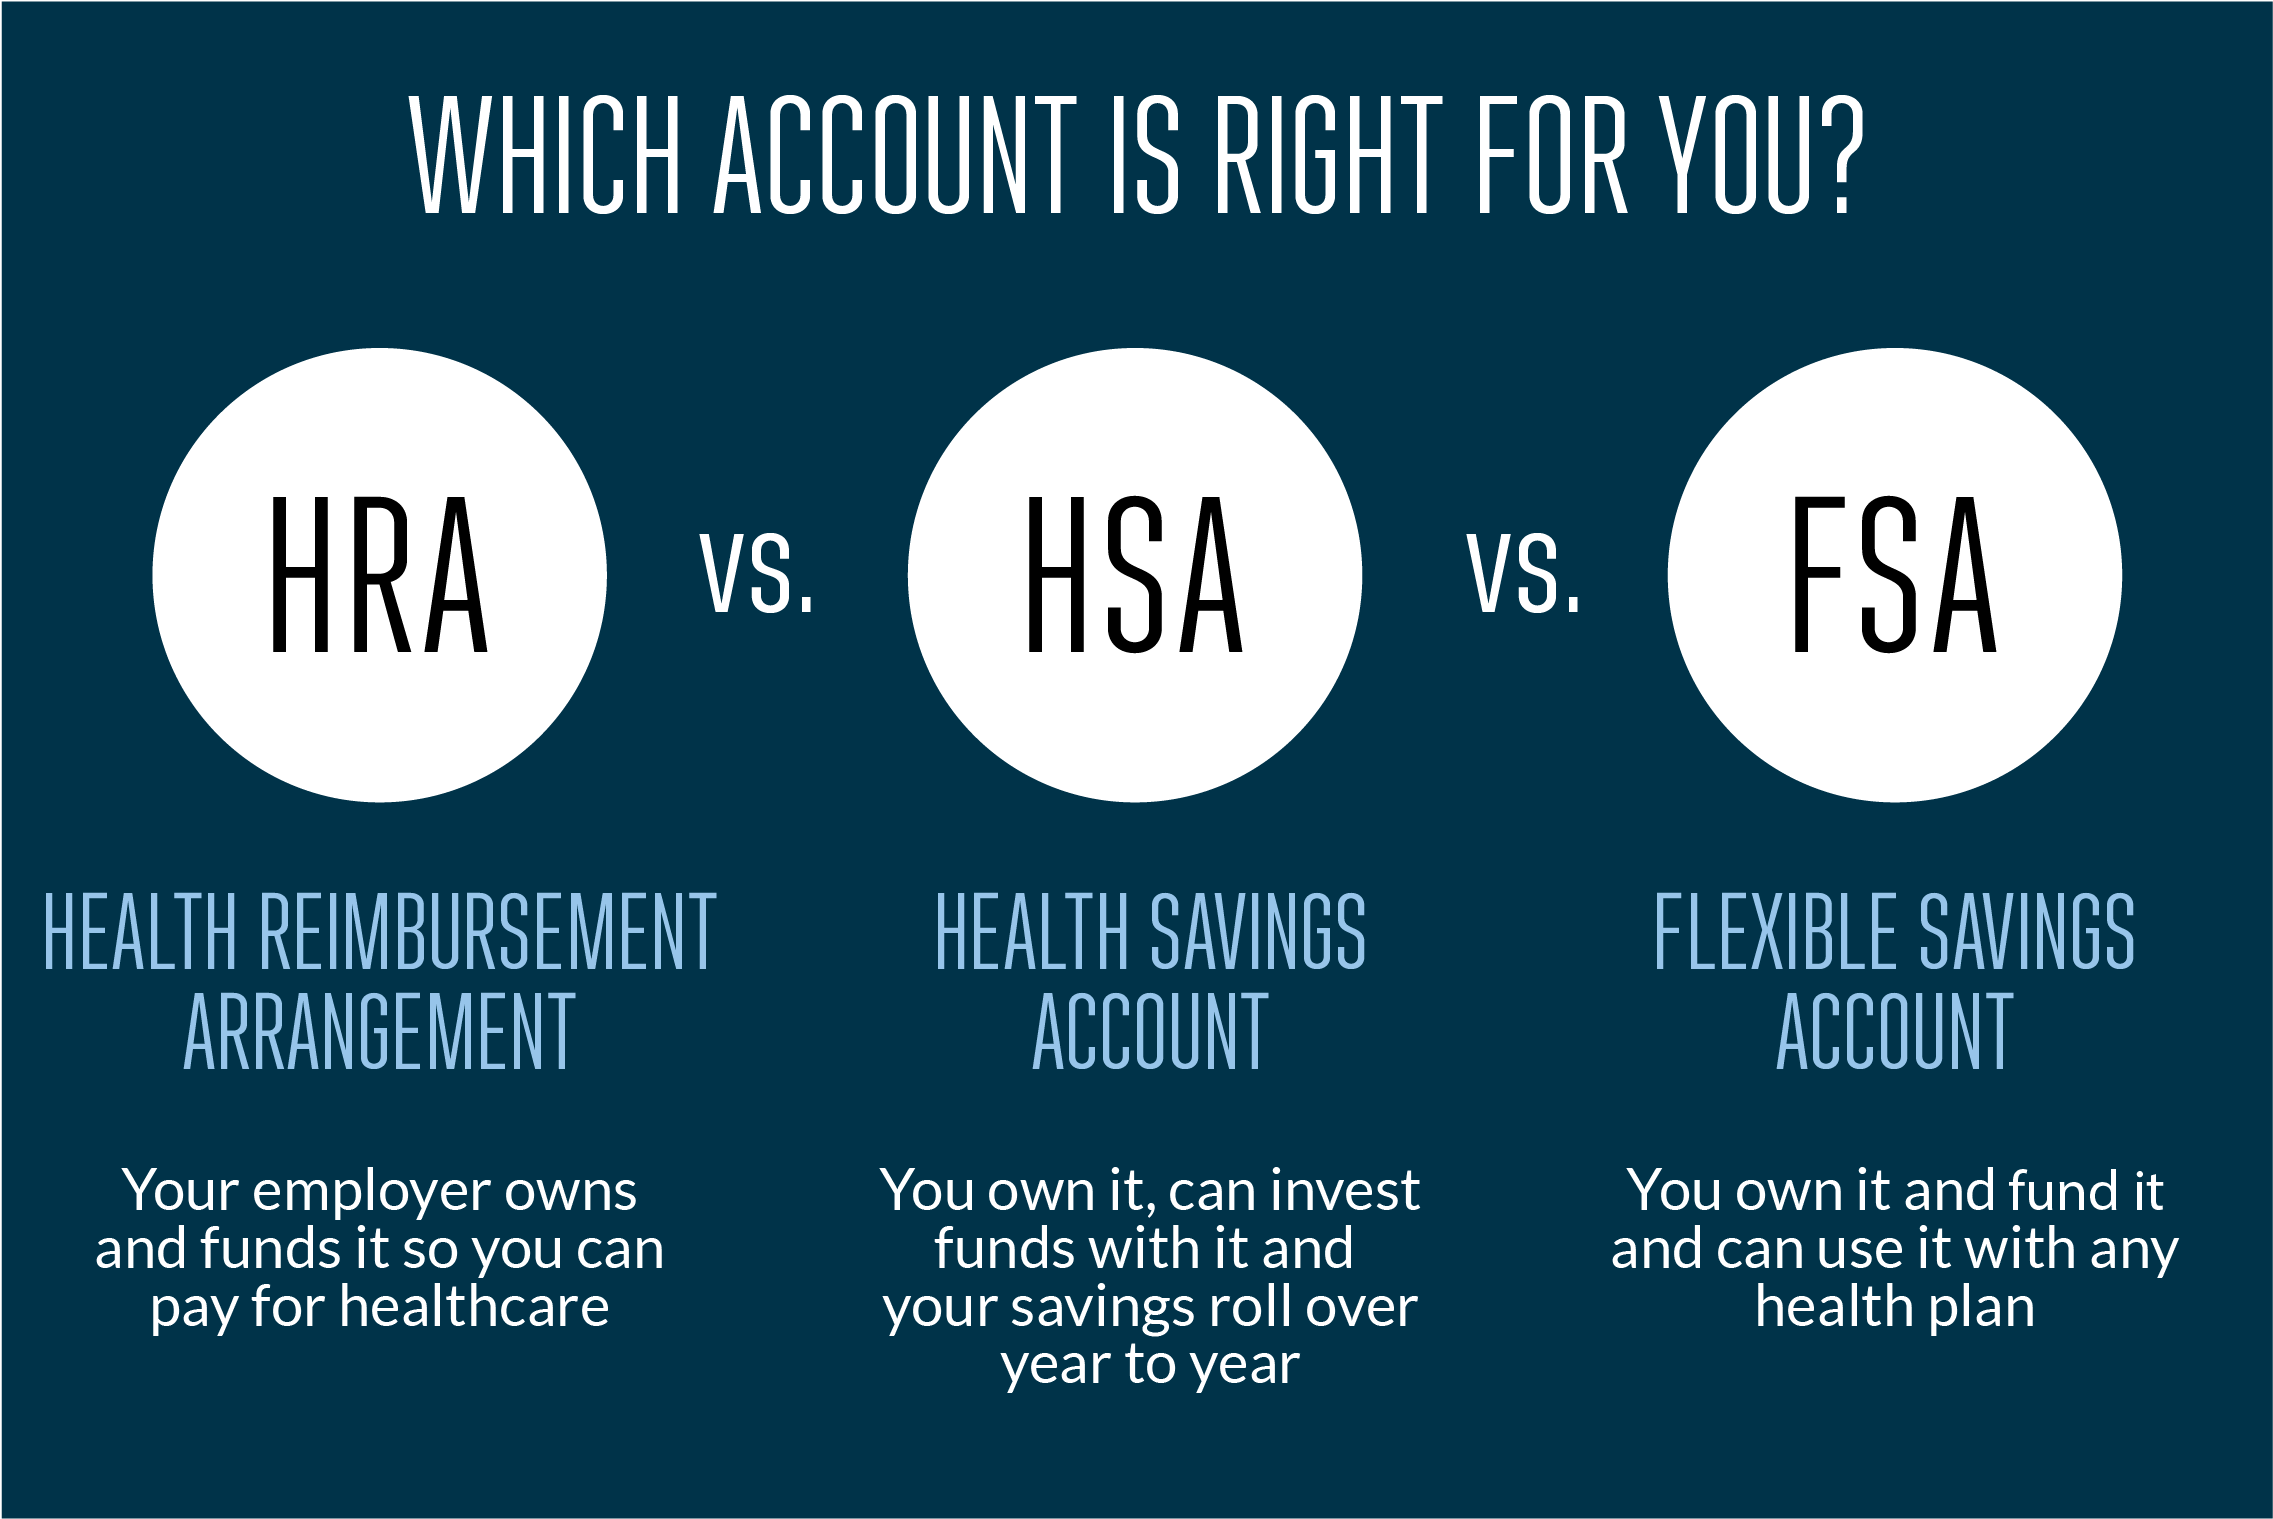 HSA vs. FSA: What's right for you?